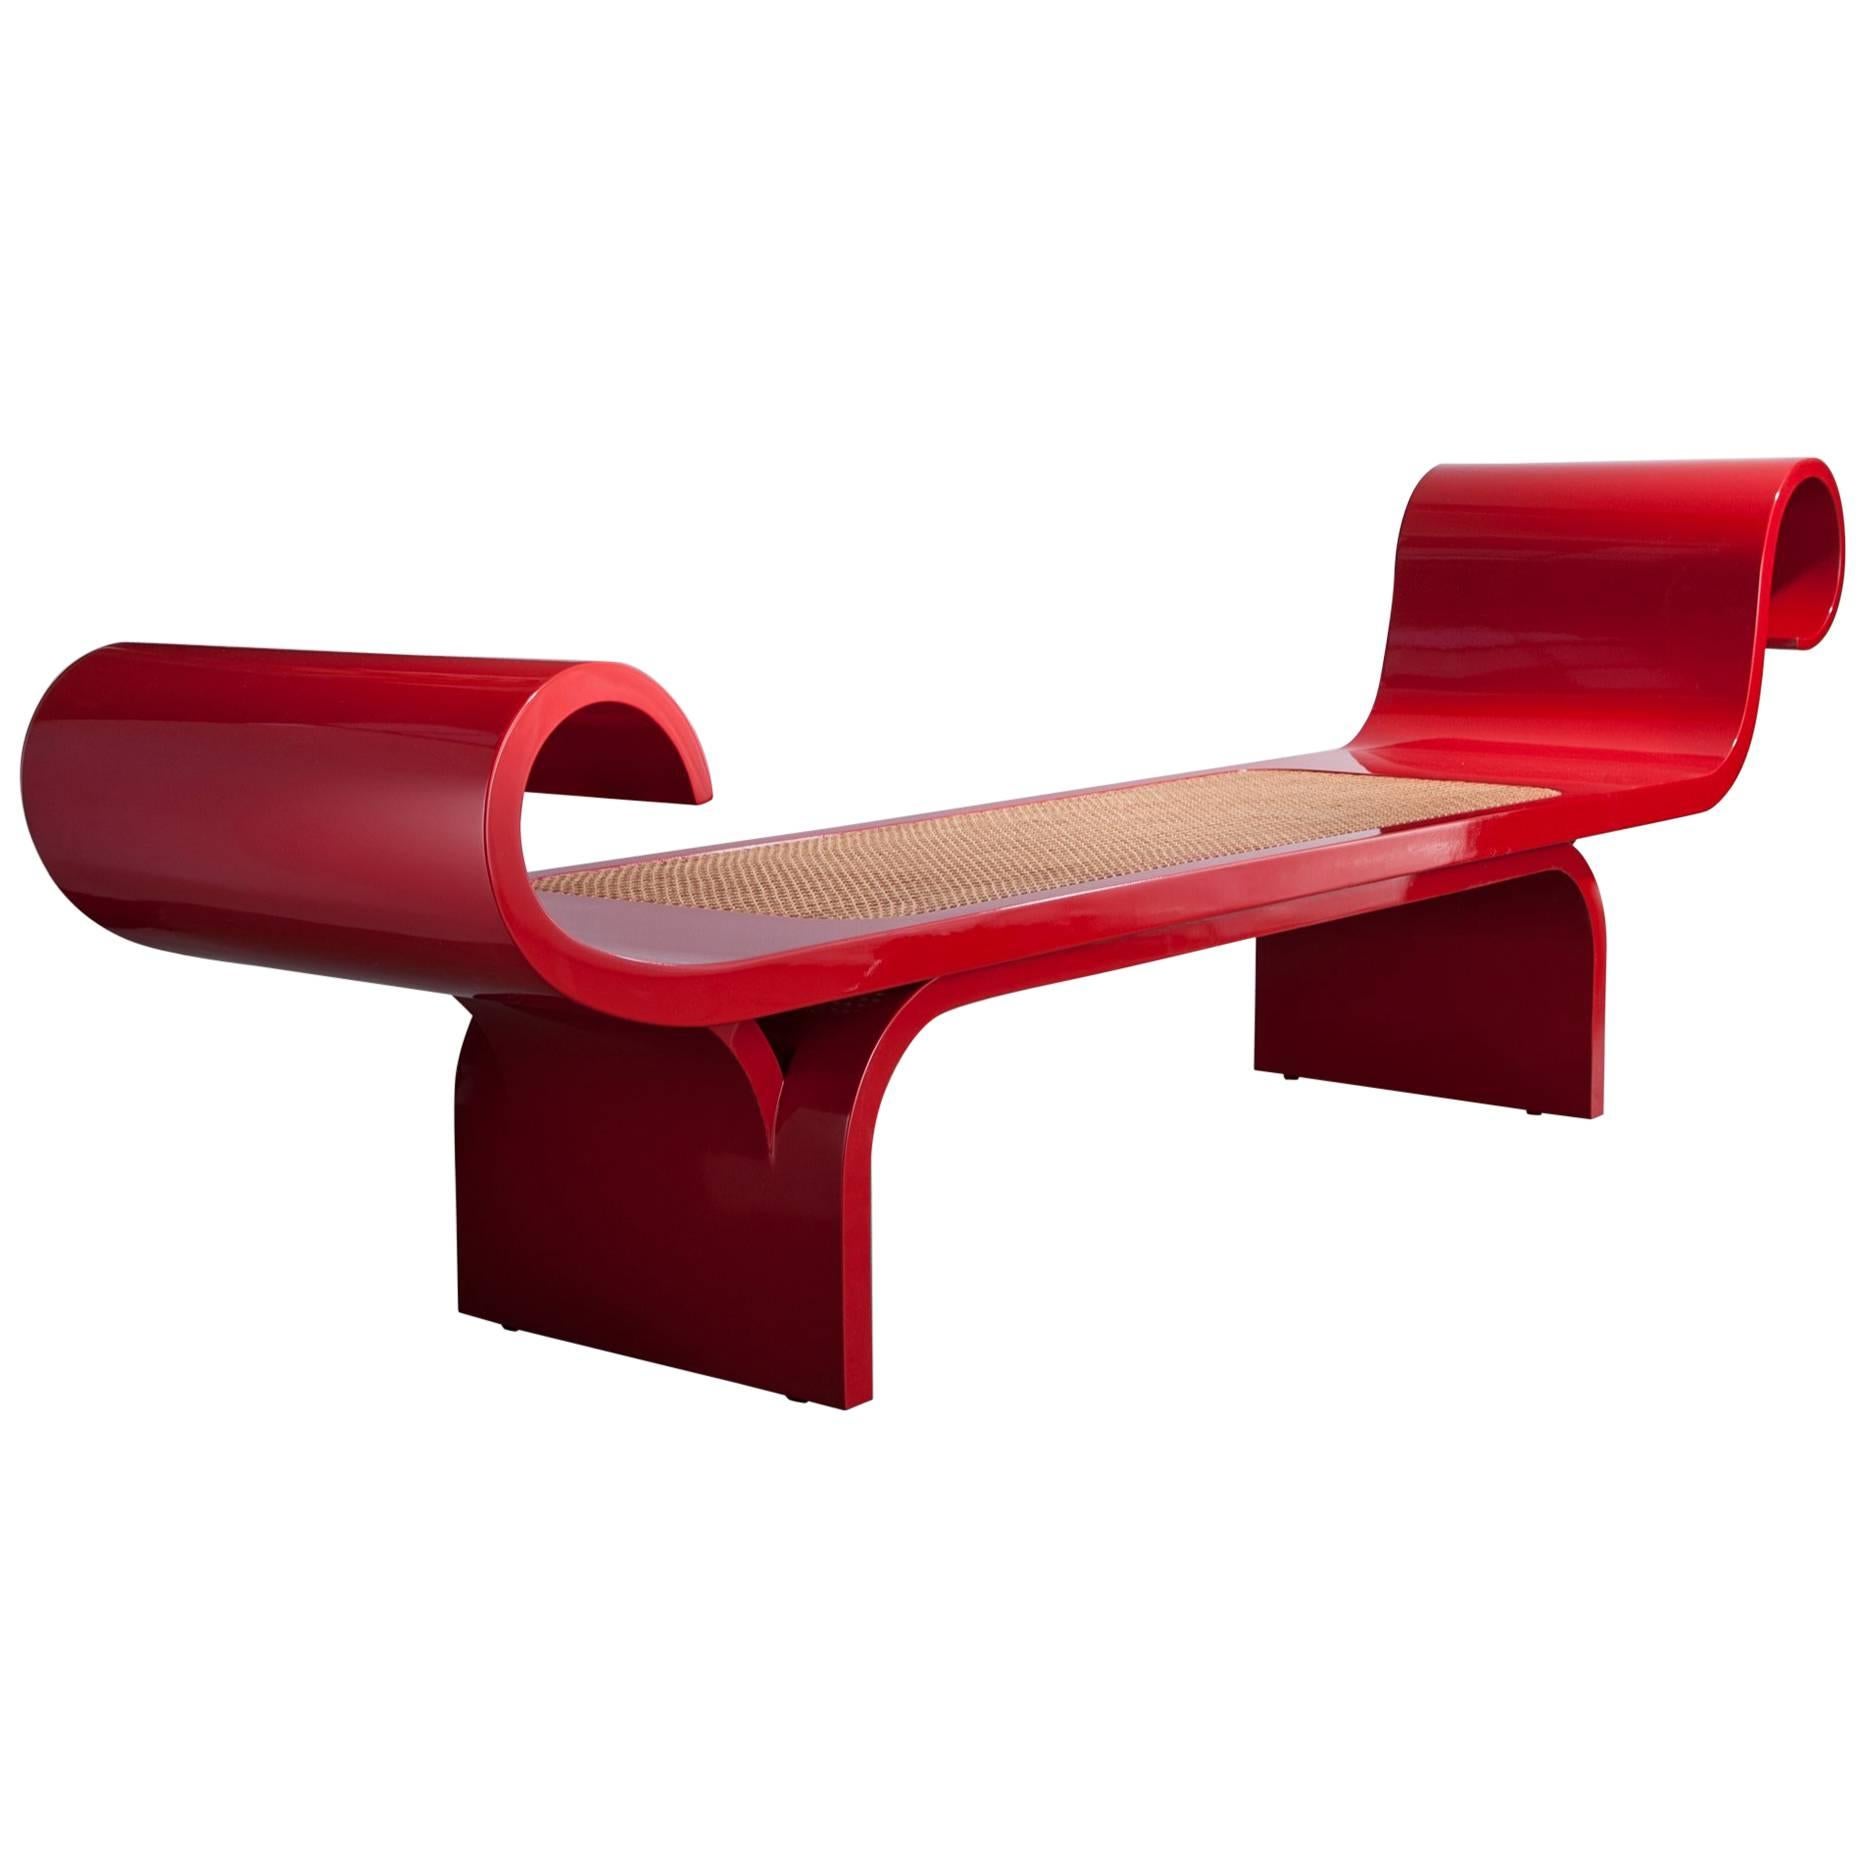 "Marquesa" Bench in Red with Cane Seat and Bent Wood Detailing at Each End